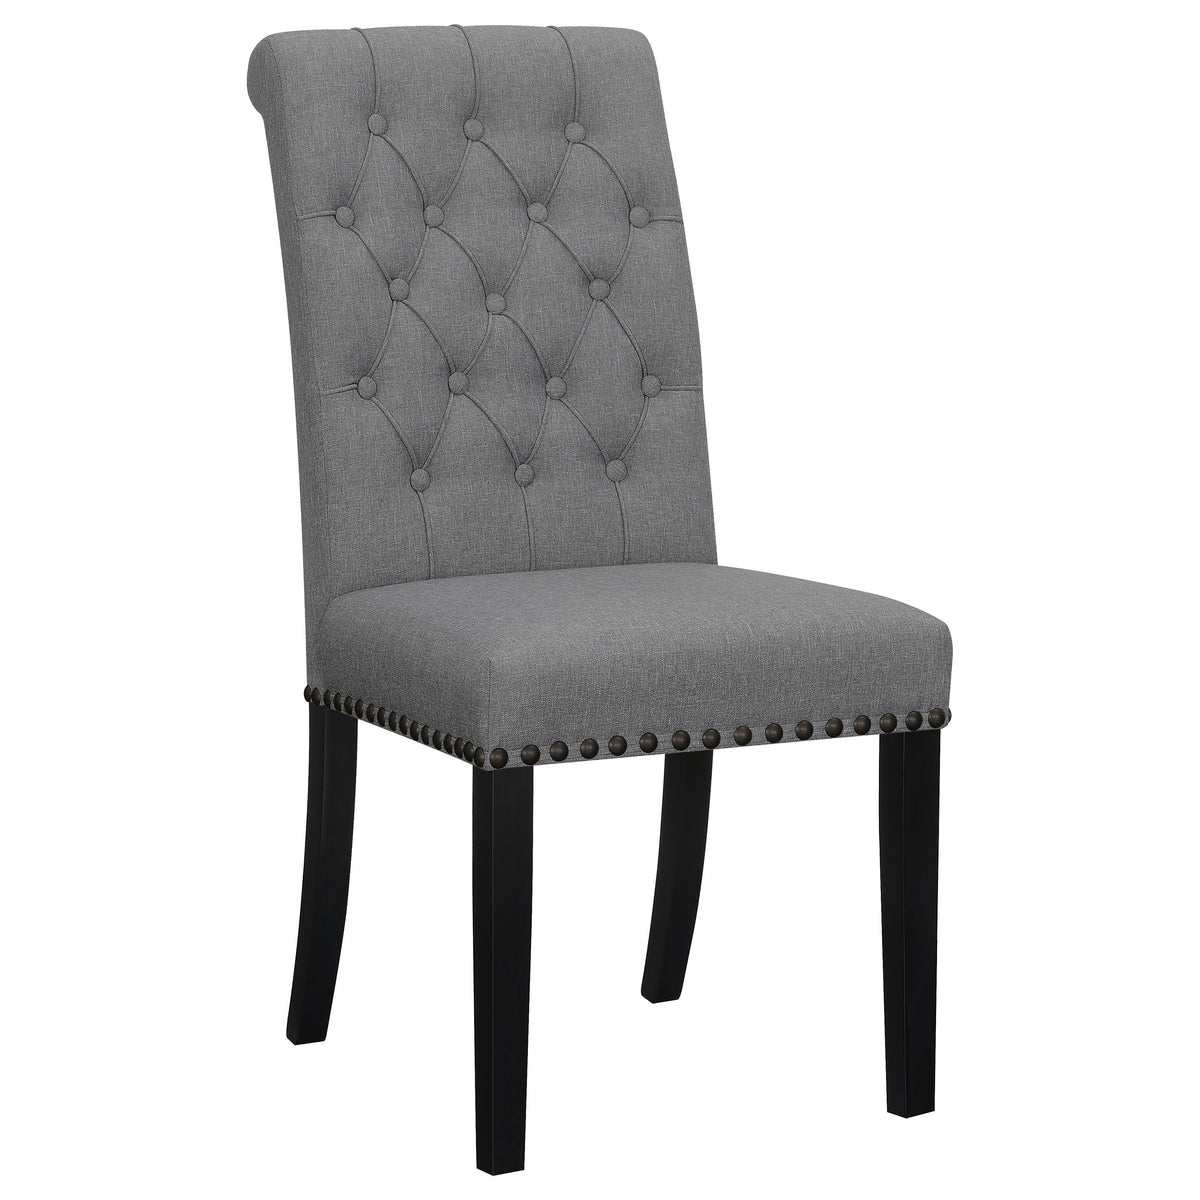 Alana Upholstered Tufted Side Chairs with Nailhead Trim (Set of 2)  Las Vegas Furniture Stores